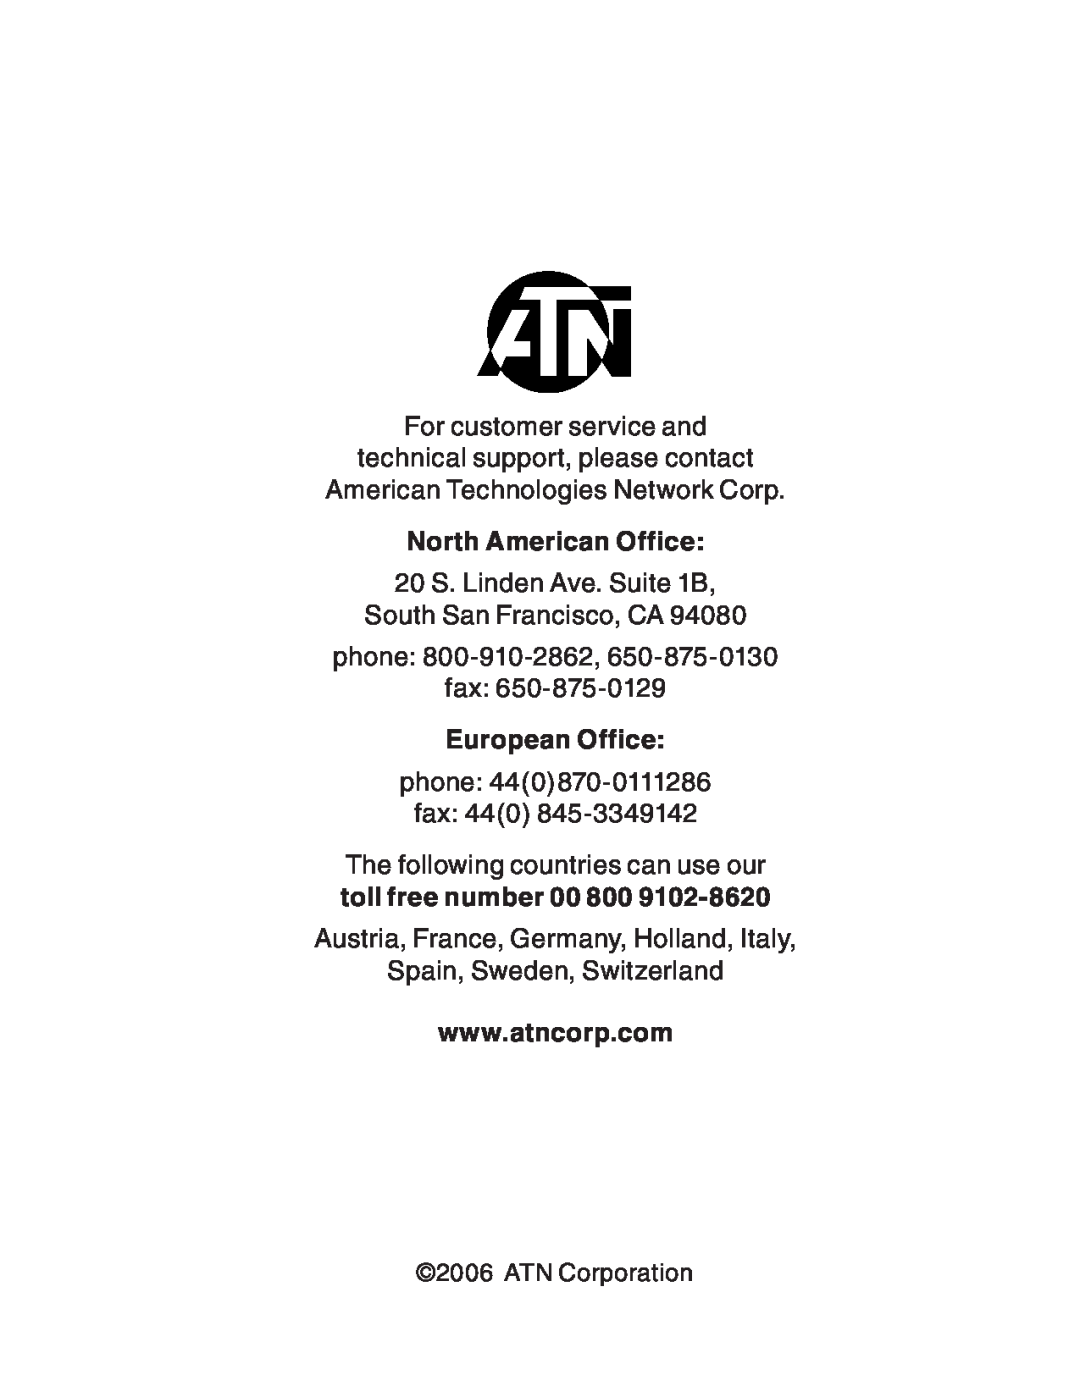 ATN 3 manual For customer service and technical support, please contact, American Technologies Network Corp 